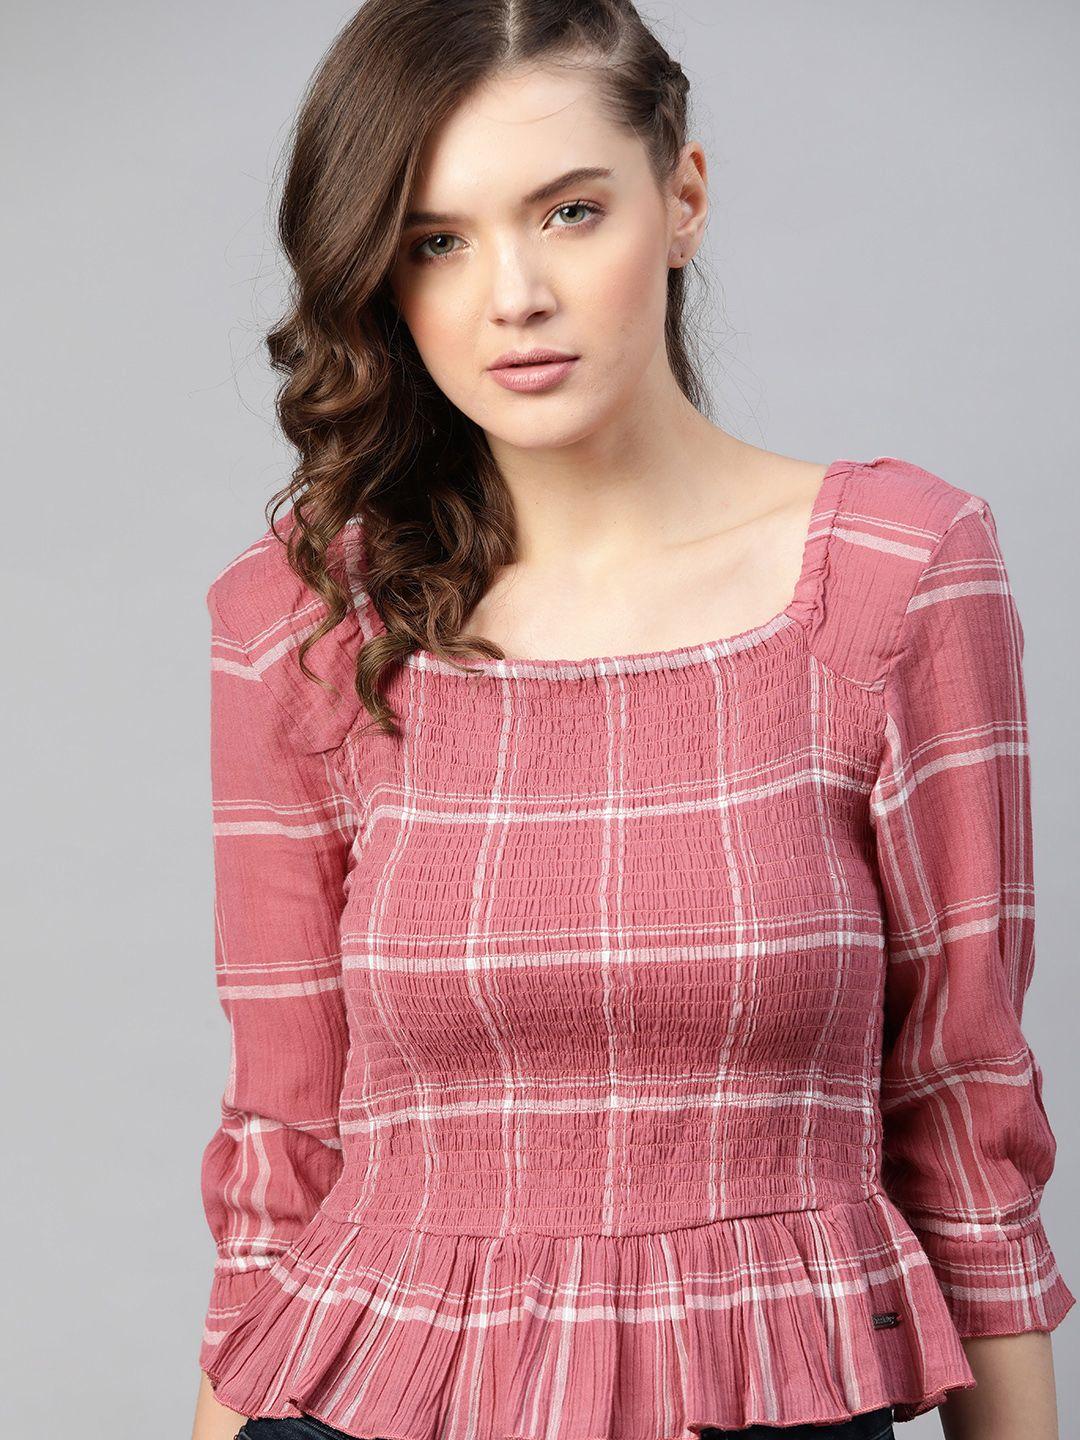 roadster dusty pink & white pure cotton checked smocked top